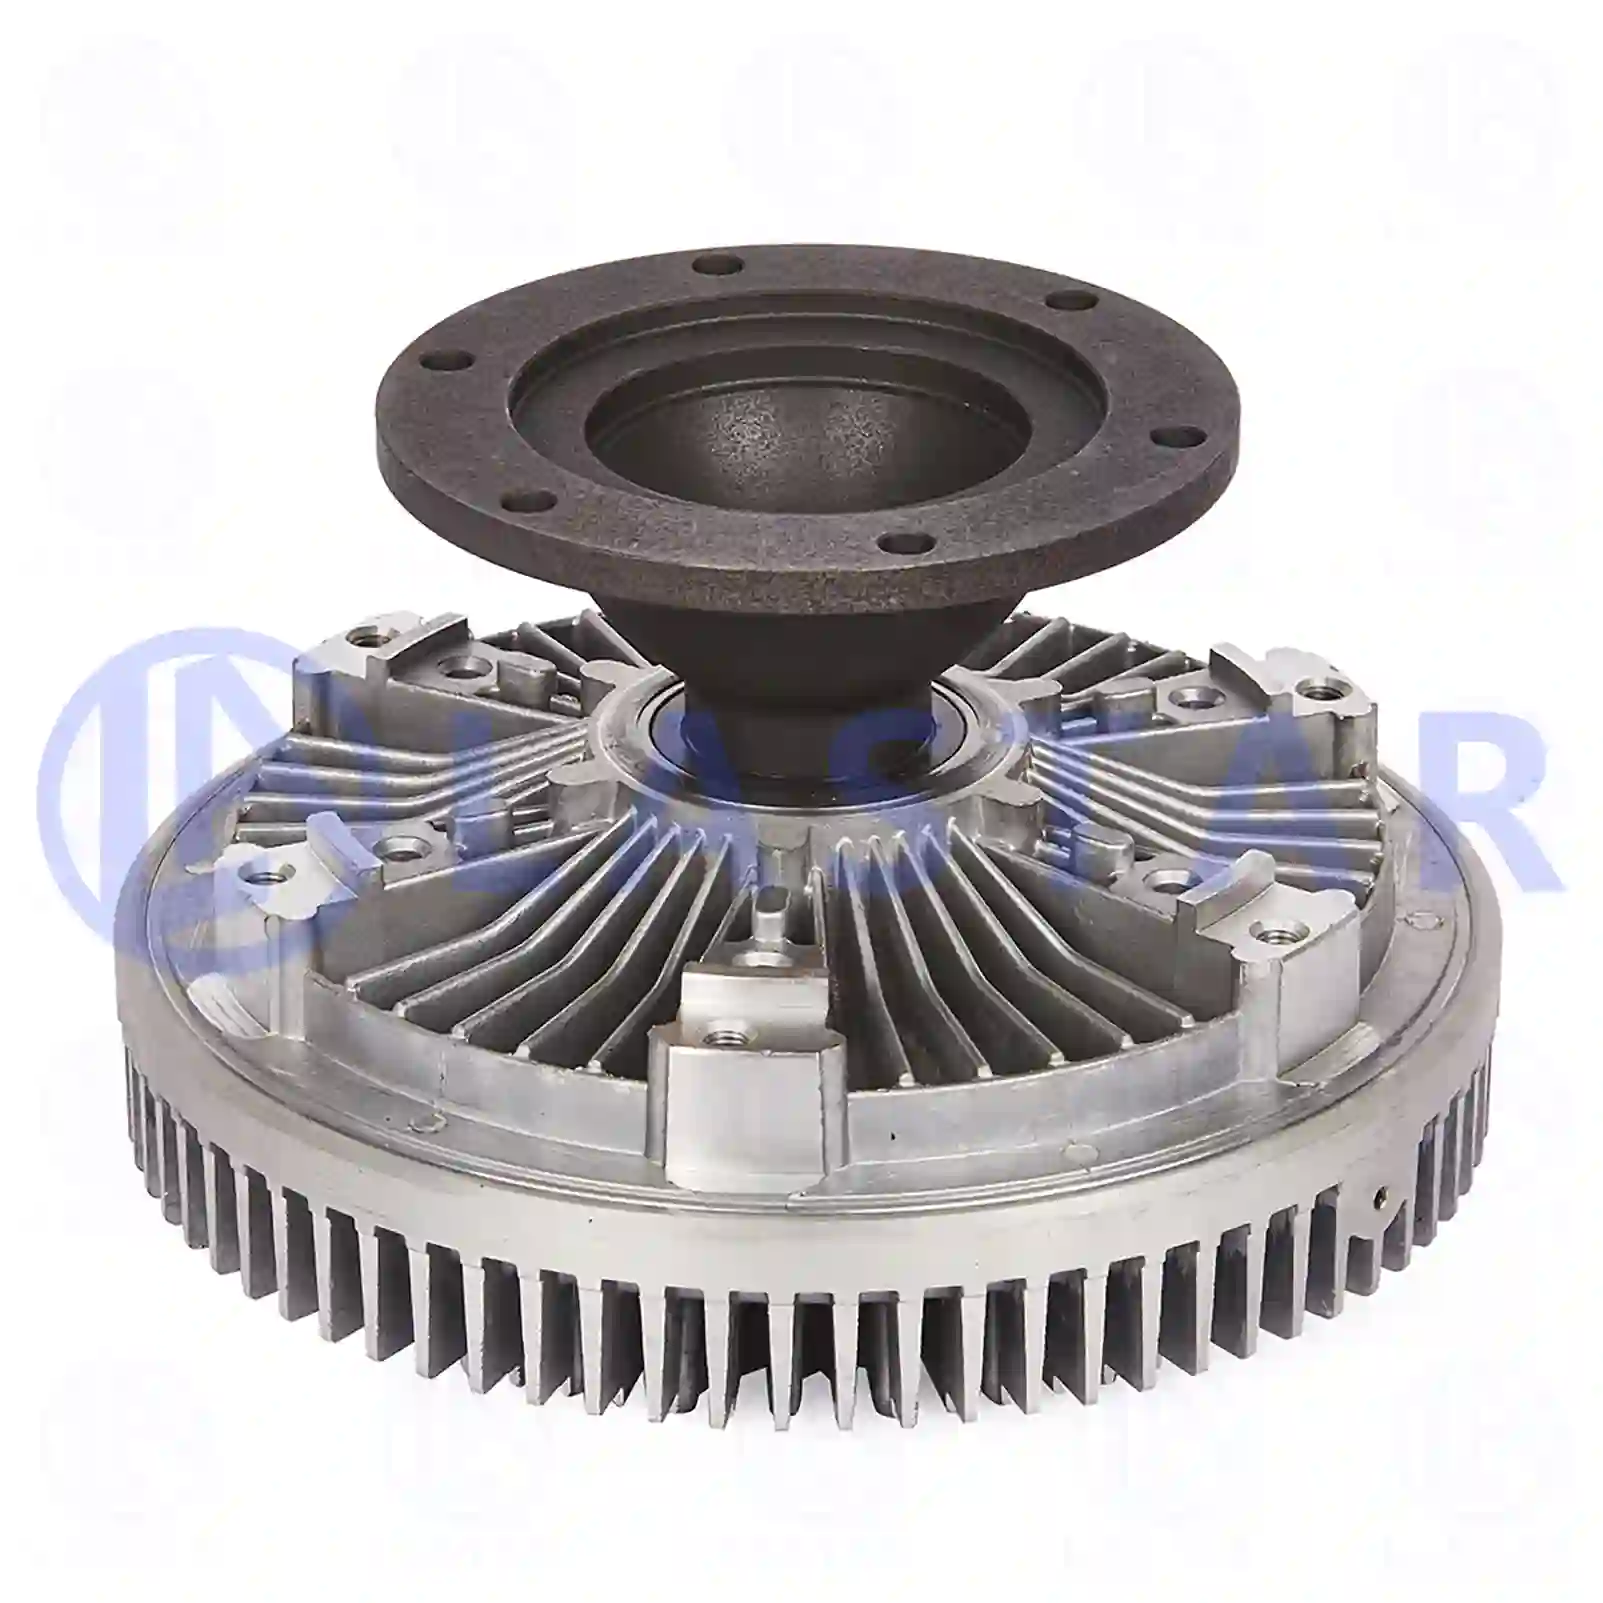 Fan clutch, 77708834, 93190926 ||  77708834 Lastar Spare Part | Truck Spare Parts, Auotomotive Spare Parts Fan clutch, 77708834, 93190926 ||  77708834 Lastar Spare Part | Truck Spare Parts, Auotomotive Spare Parts